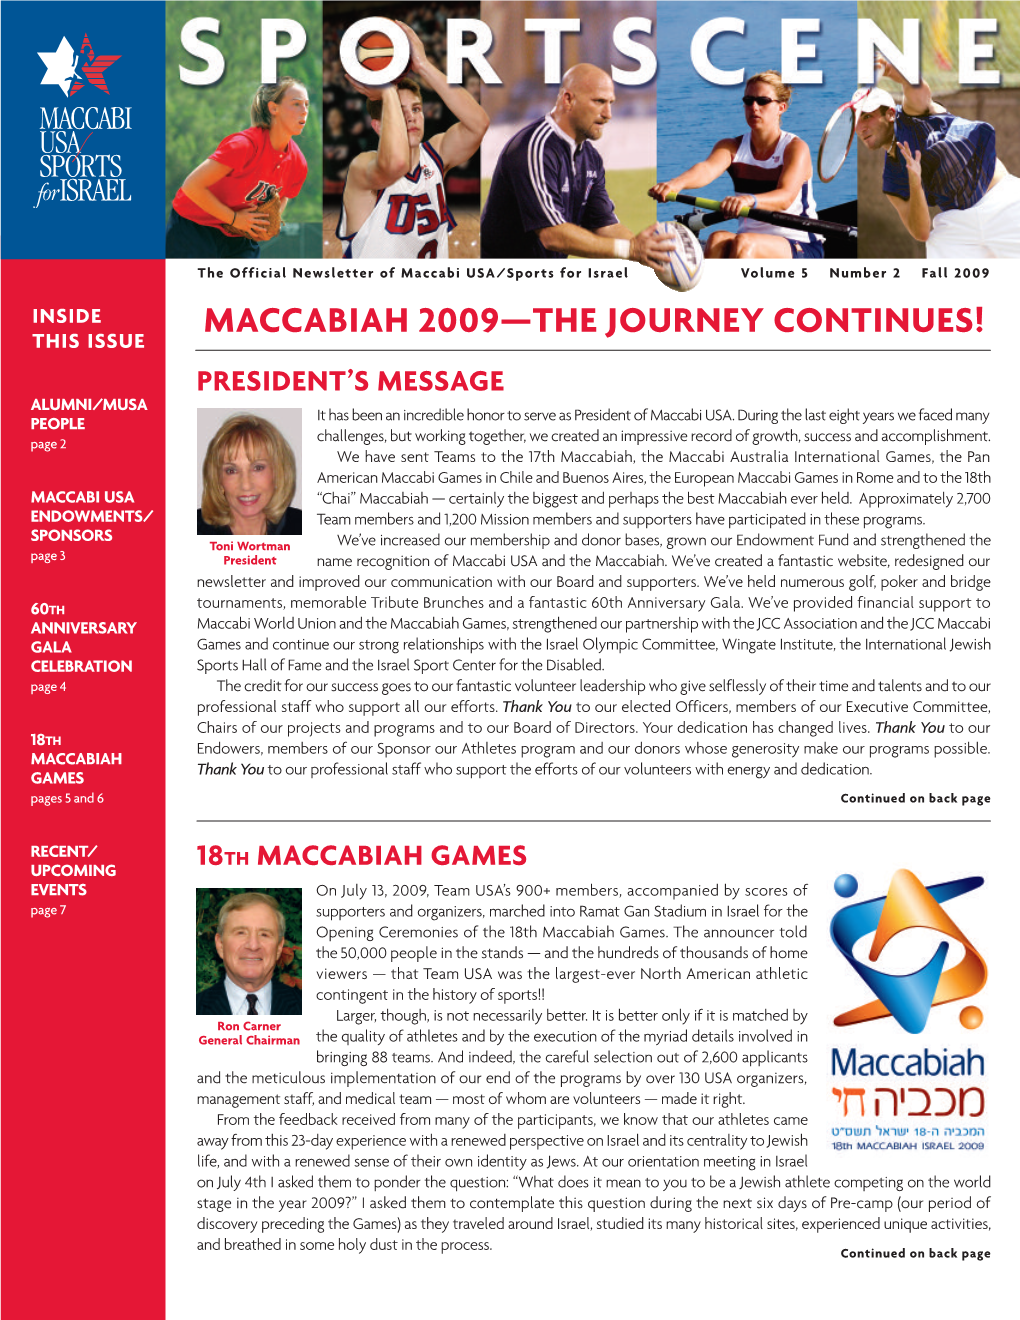 MACCABIAH 2009—THE JOURNEY CONTINUES! THIS ISSUE PRESIDENT’S MESSAGE ALUMNI/MUSA PEOPLE It Has Been an Incredible Honor to Serve As President of Maccabi USA